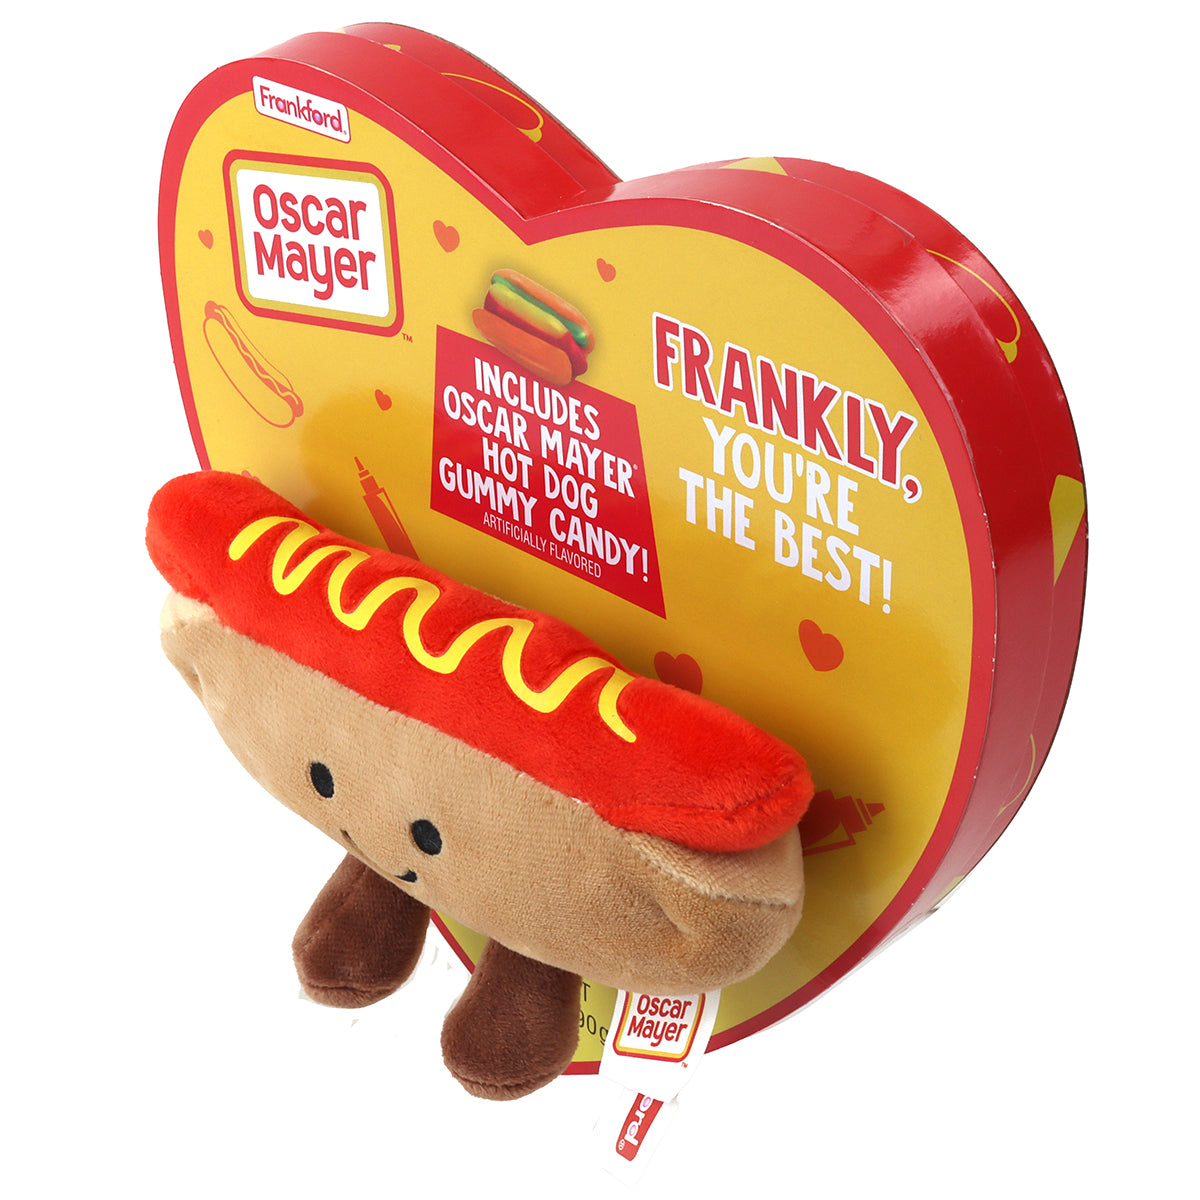 top view of yellow heart shaped box with red border and a hot dog plush on the front